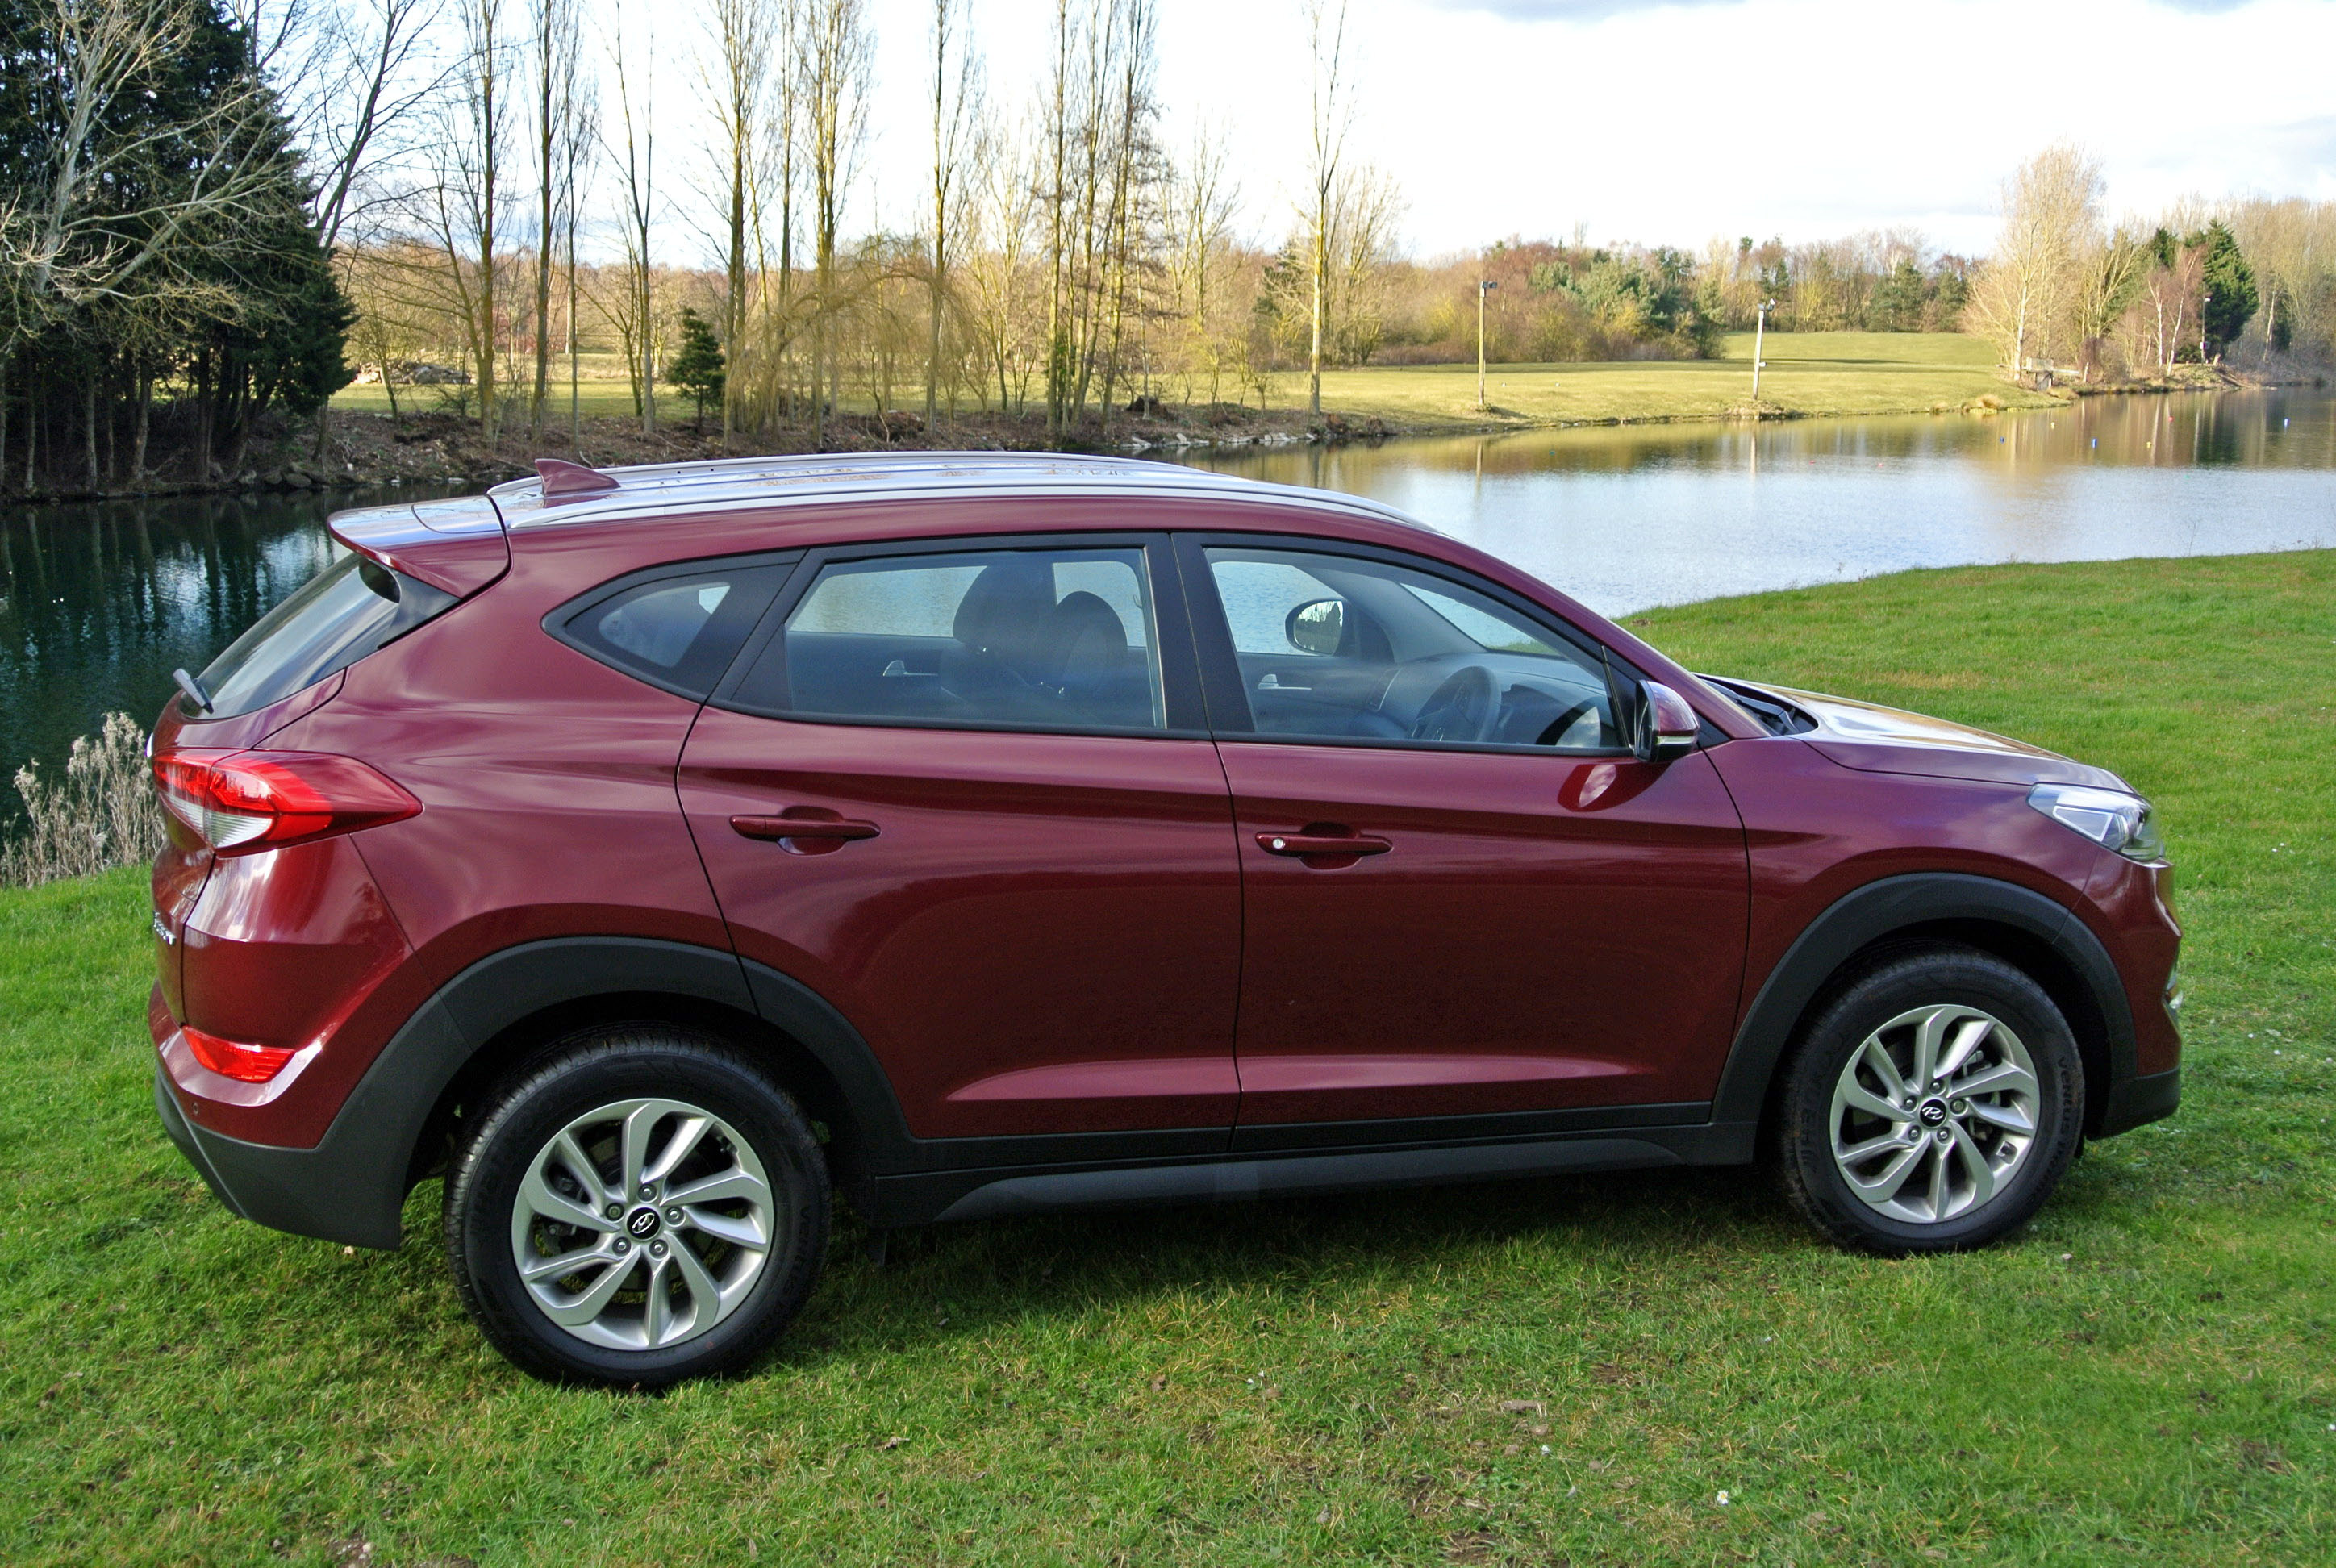 Hyundai Tucson provides ample proof of ‘Kaizen’ in action